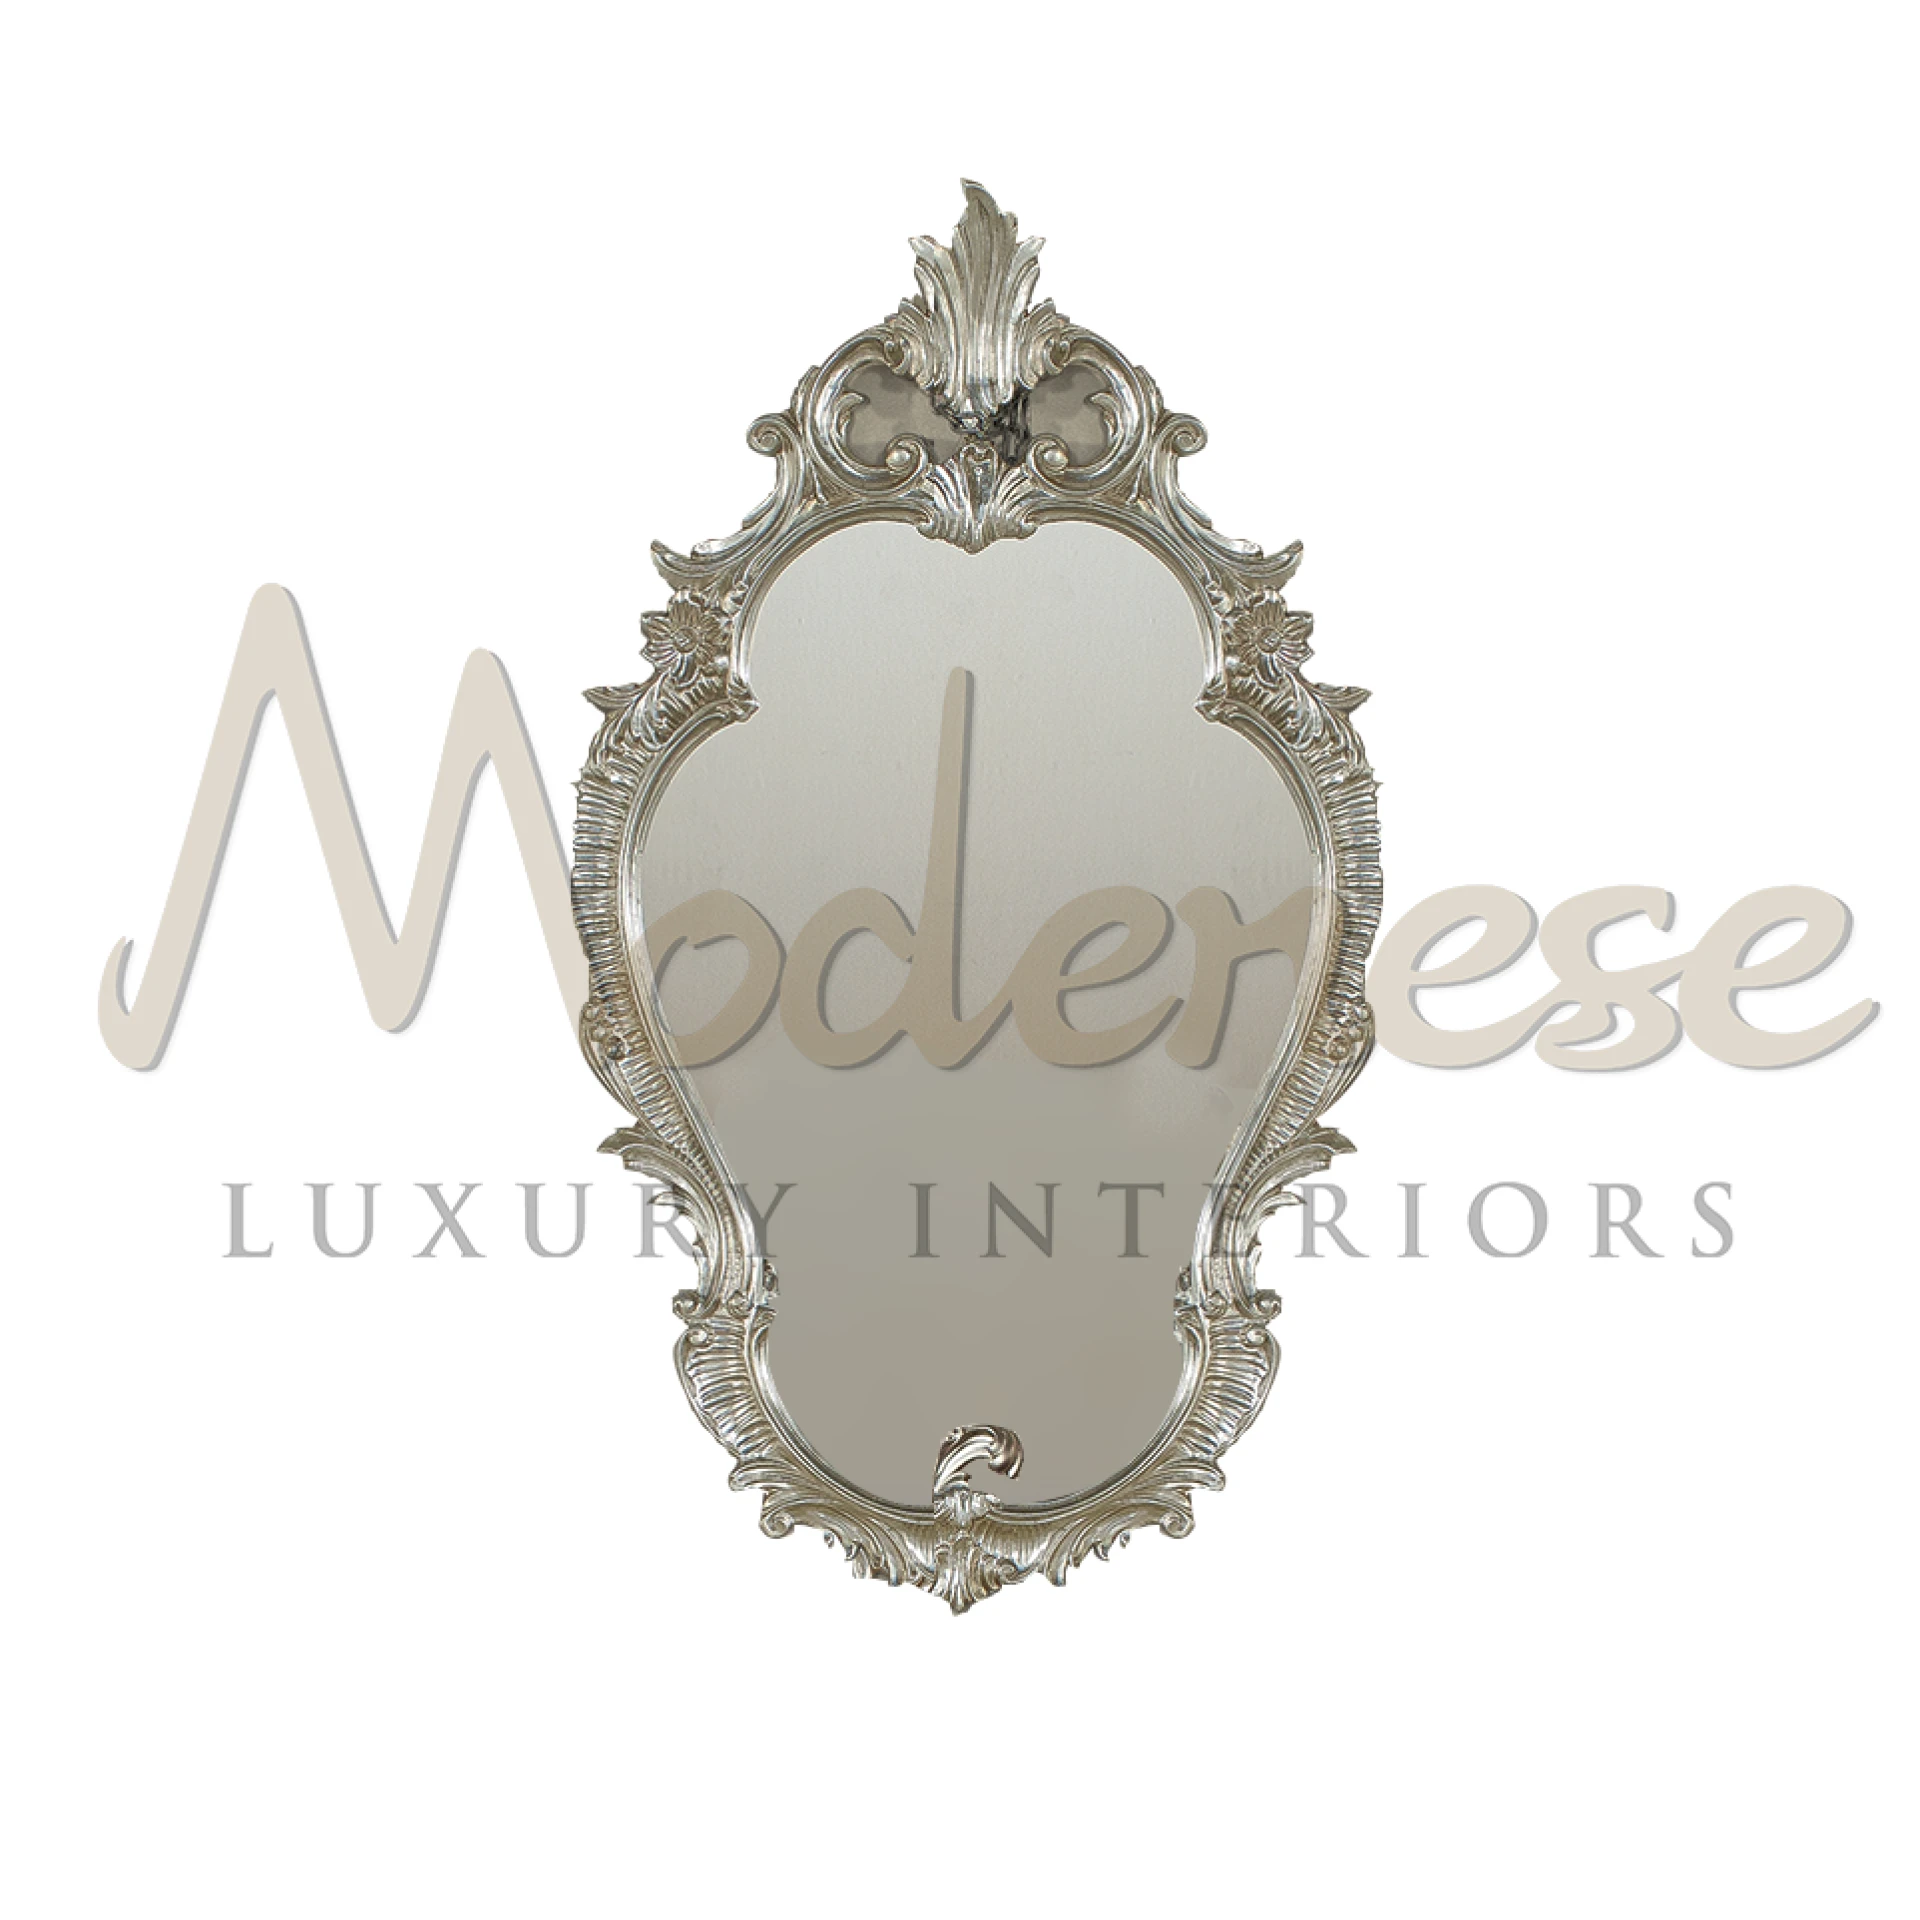 Elegant Silver Leaf Wall Mirror, available in shapes like rectangular, oval, and round, for versatile style.